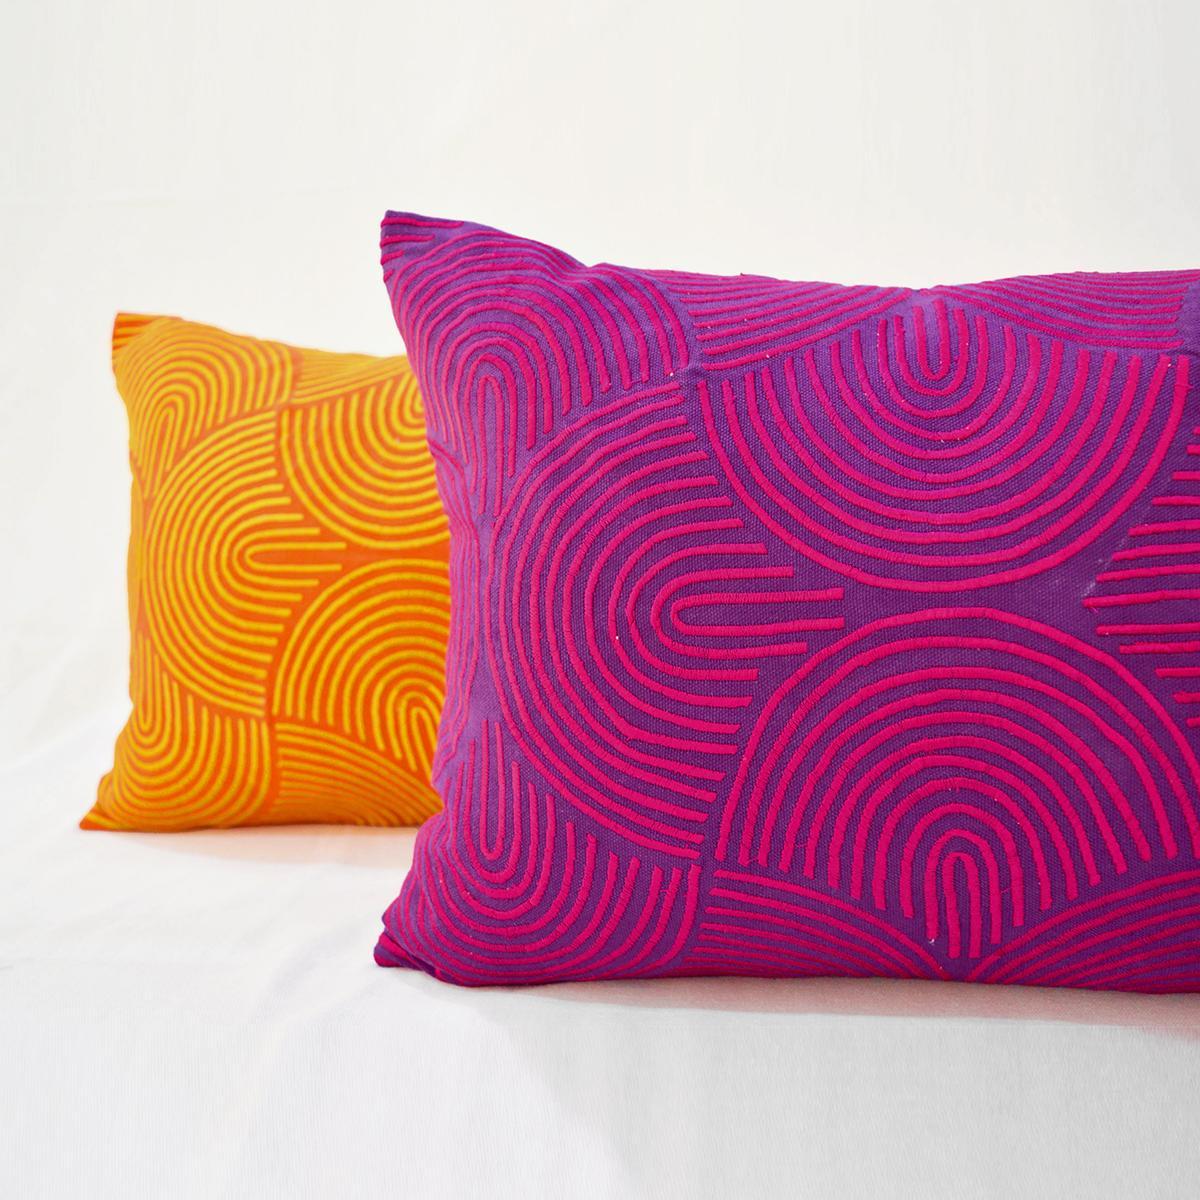 Plum modern retro pattern embroidered cotton pillow cover, long lumbar pillow cover & other sizes available